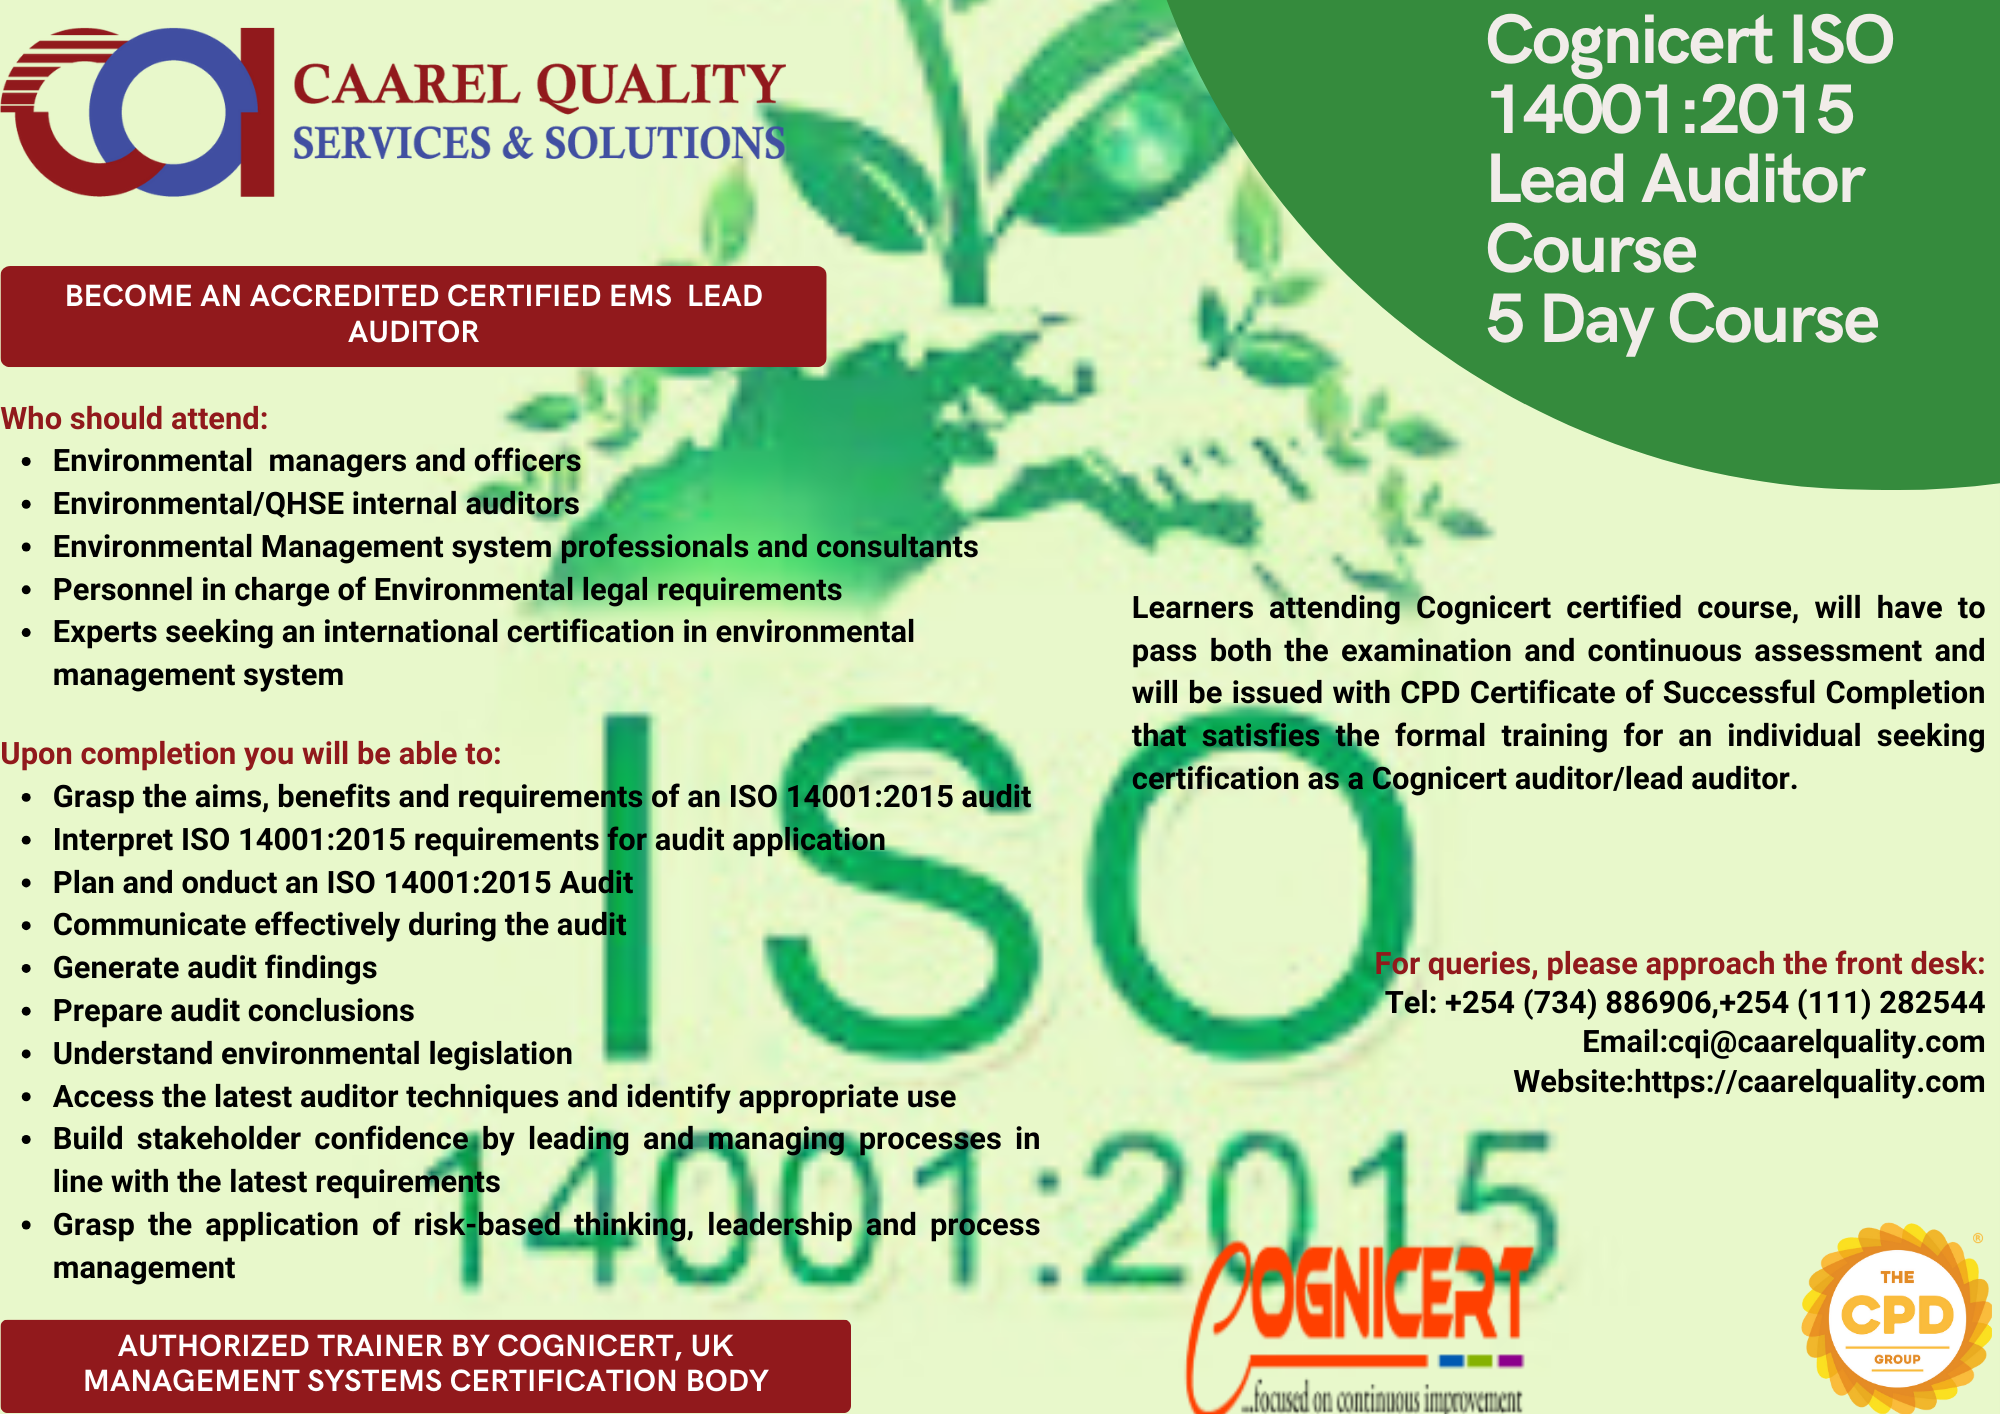 Cognicert ISO 14001:2015 Environmental Management System Lead Auditor Certification Course(CPD Accredited)